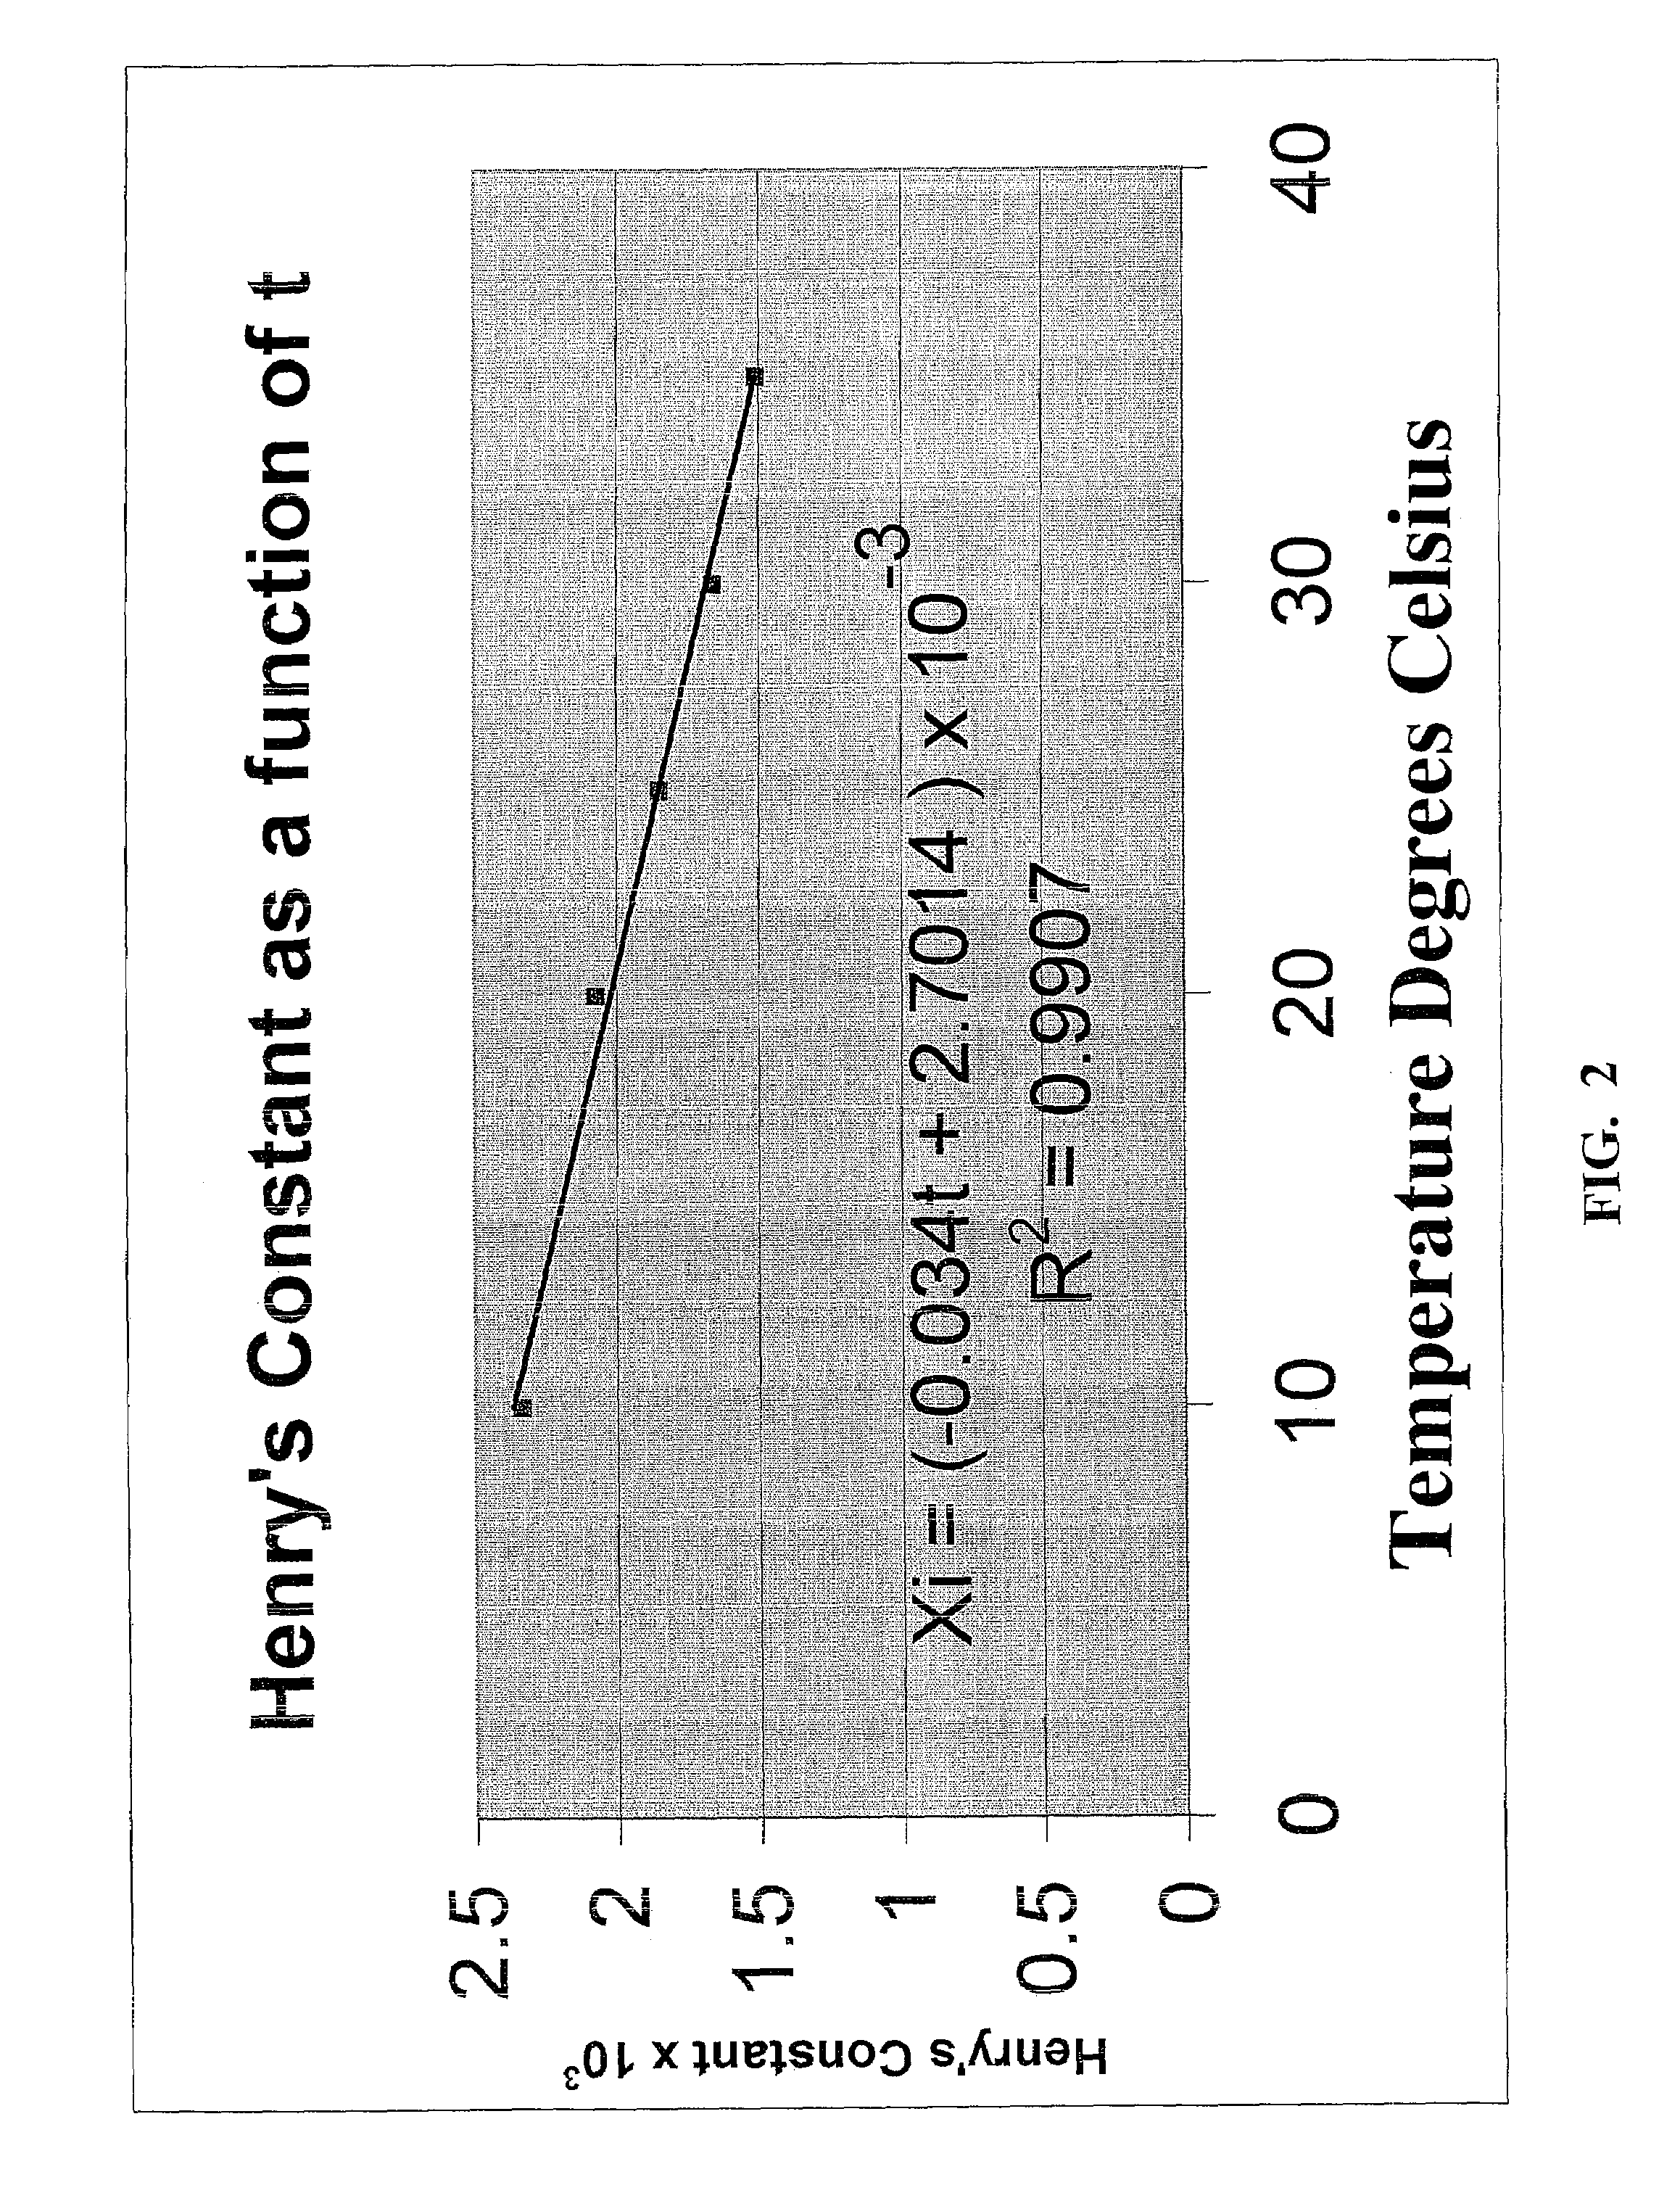 Method for determining the chemical dosage required to reduce sulfides in wastewater to acceptable levels